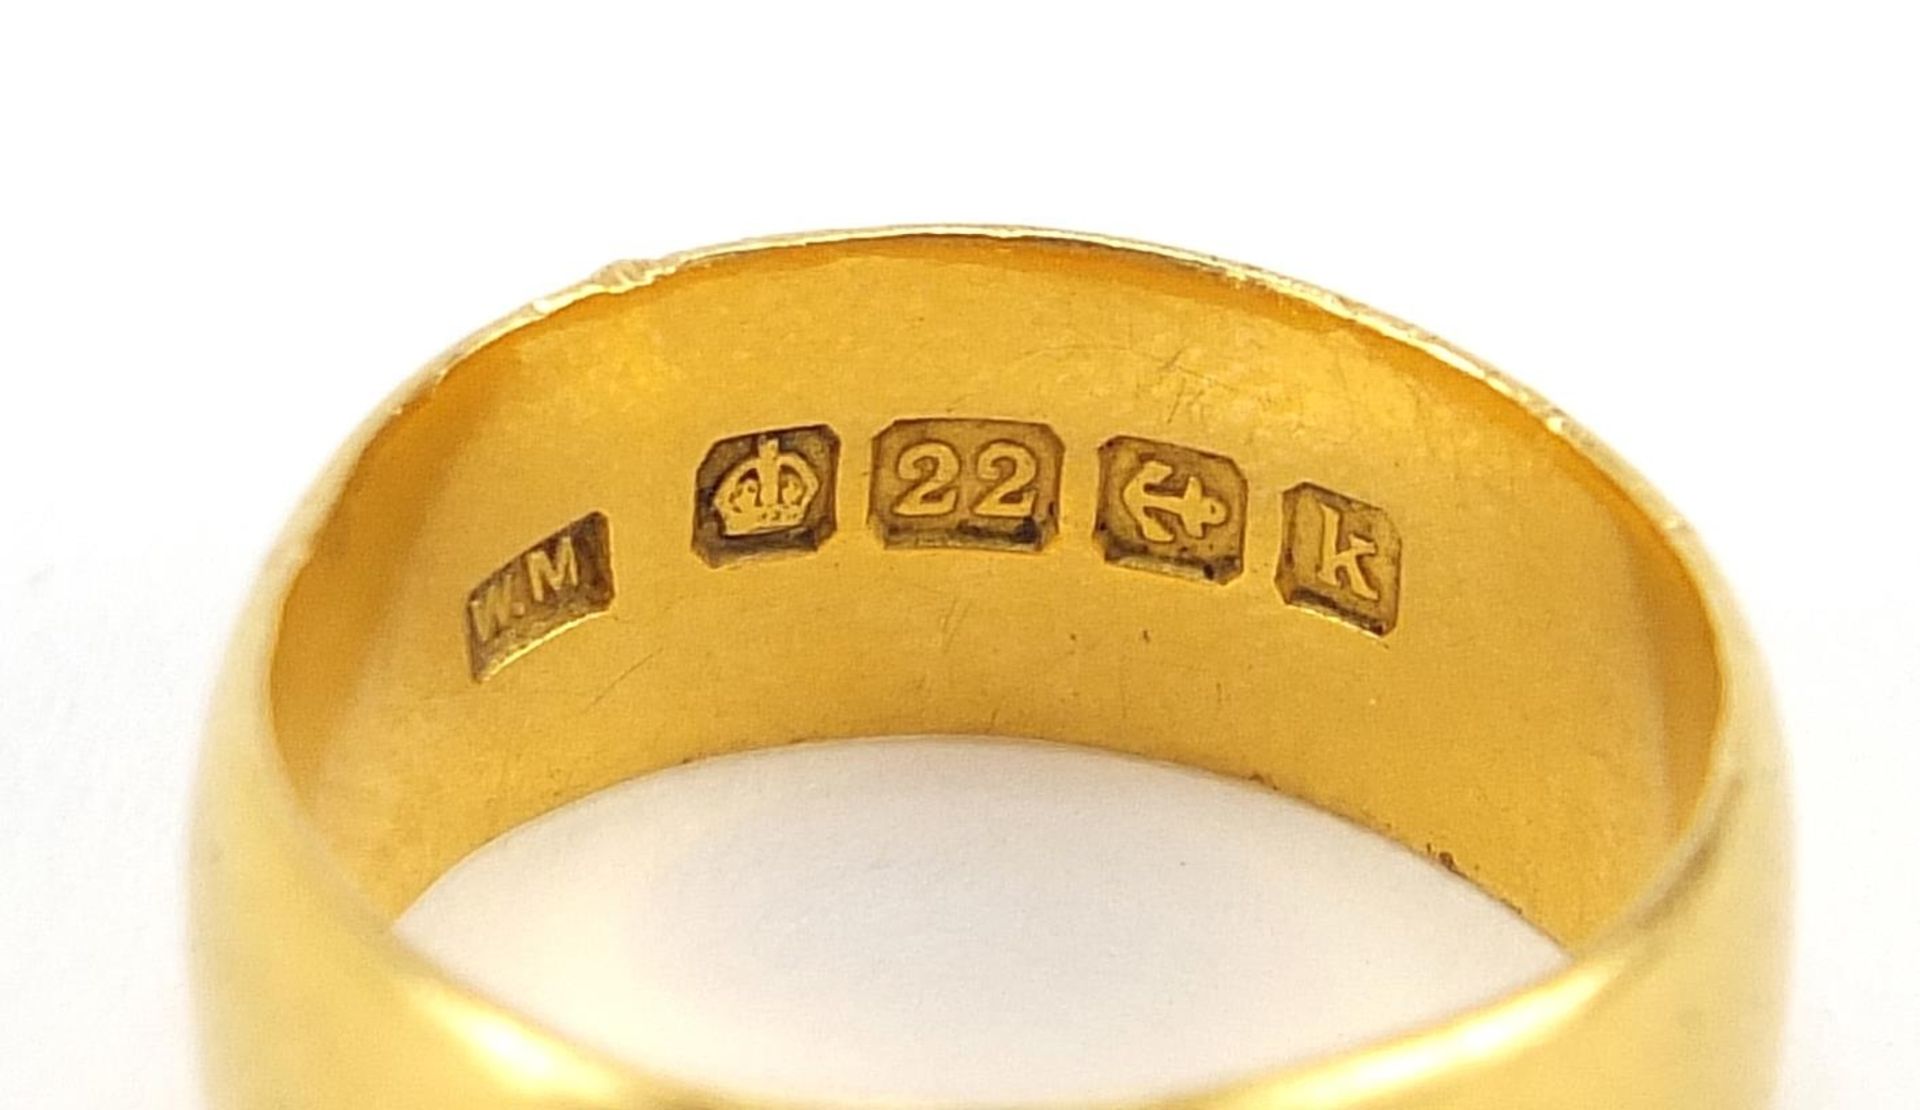 Edwardian 22ct gold wedding band, Birmingham 1909, size I, 5.9g - this lot is sold without buyer's - Image 3 of 3